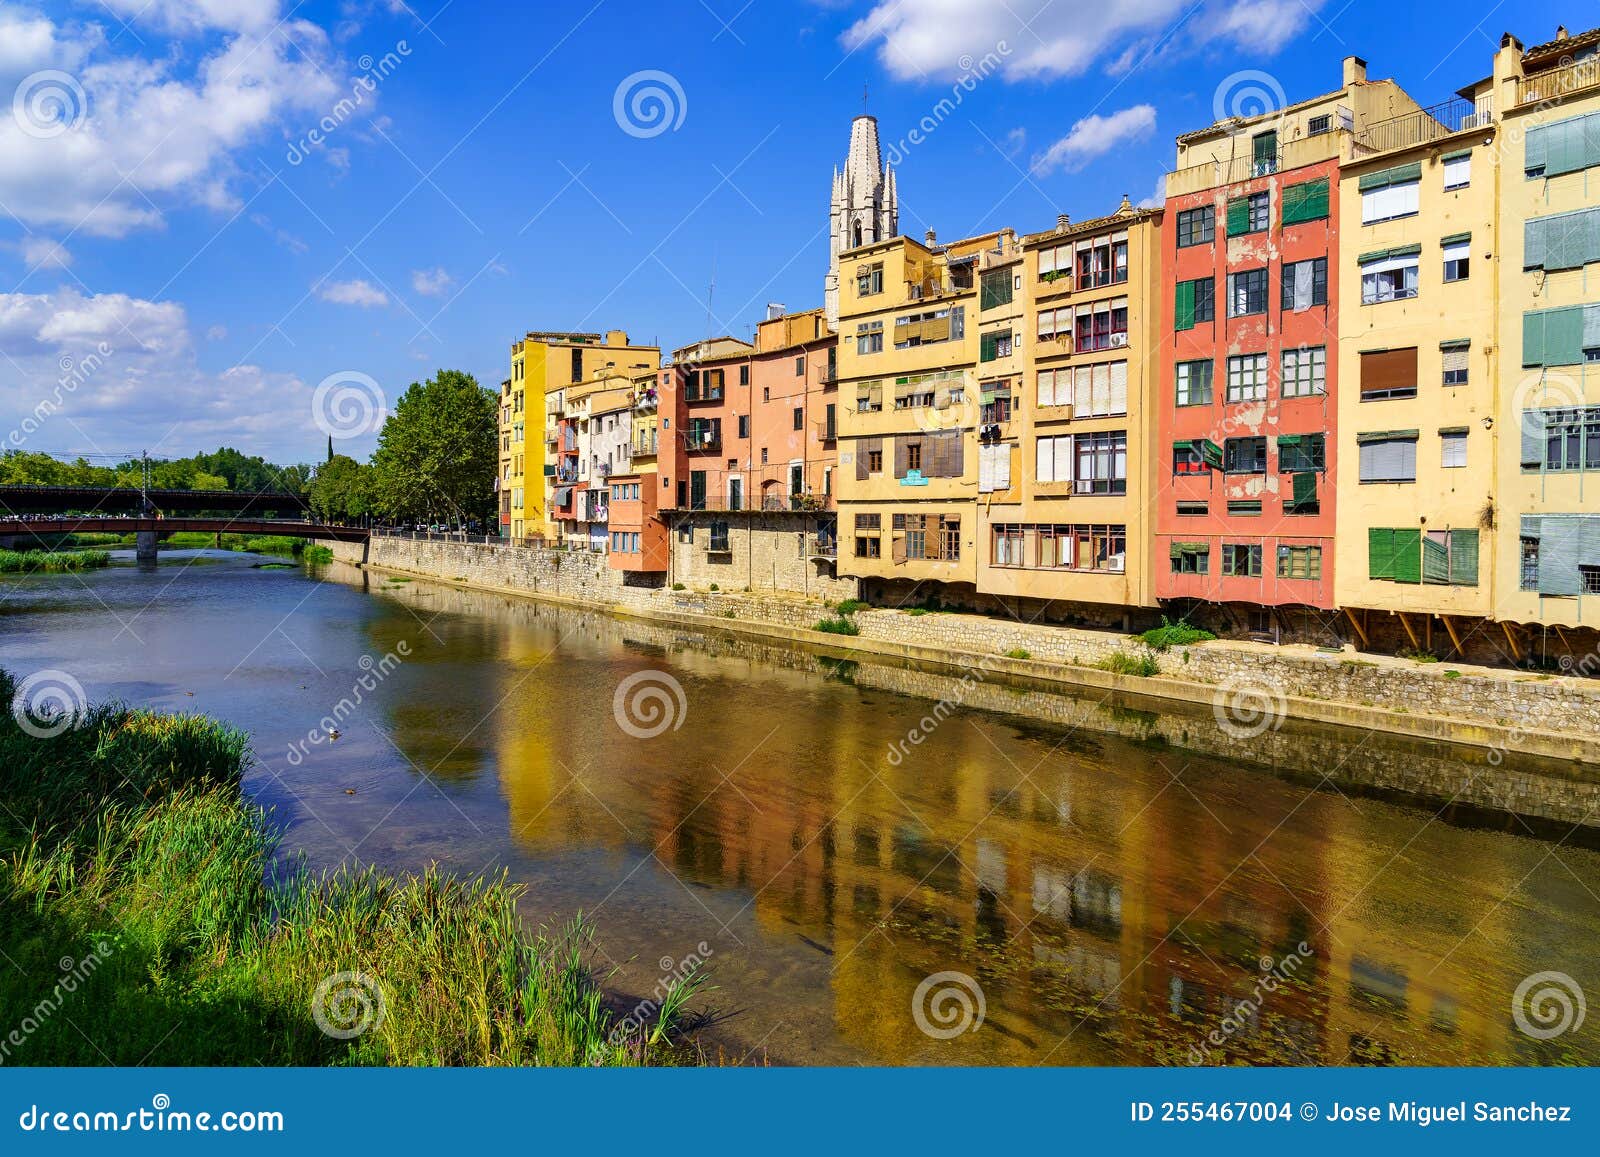 rio onyar as it passes through girona with its colorful houses on both banks of the river, catalonia, spain.